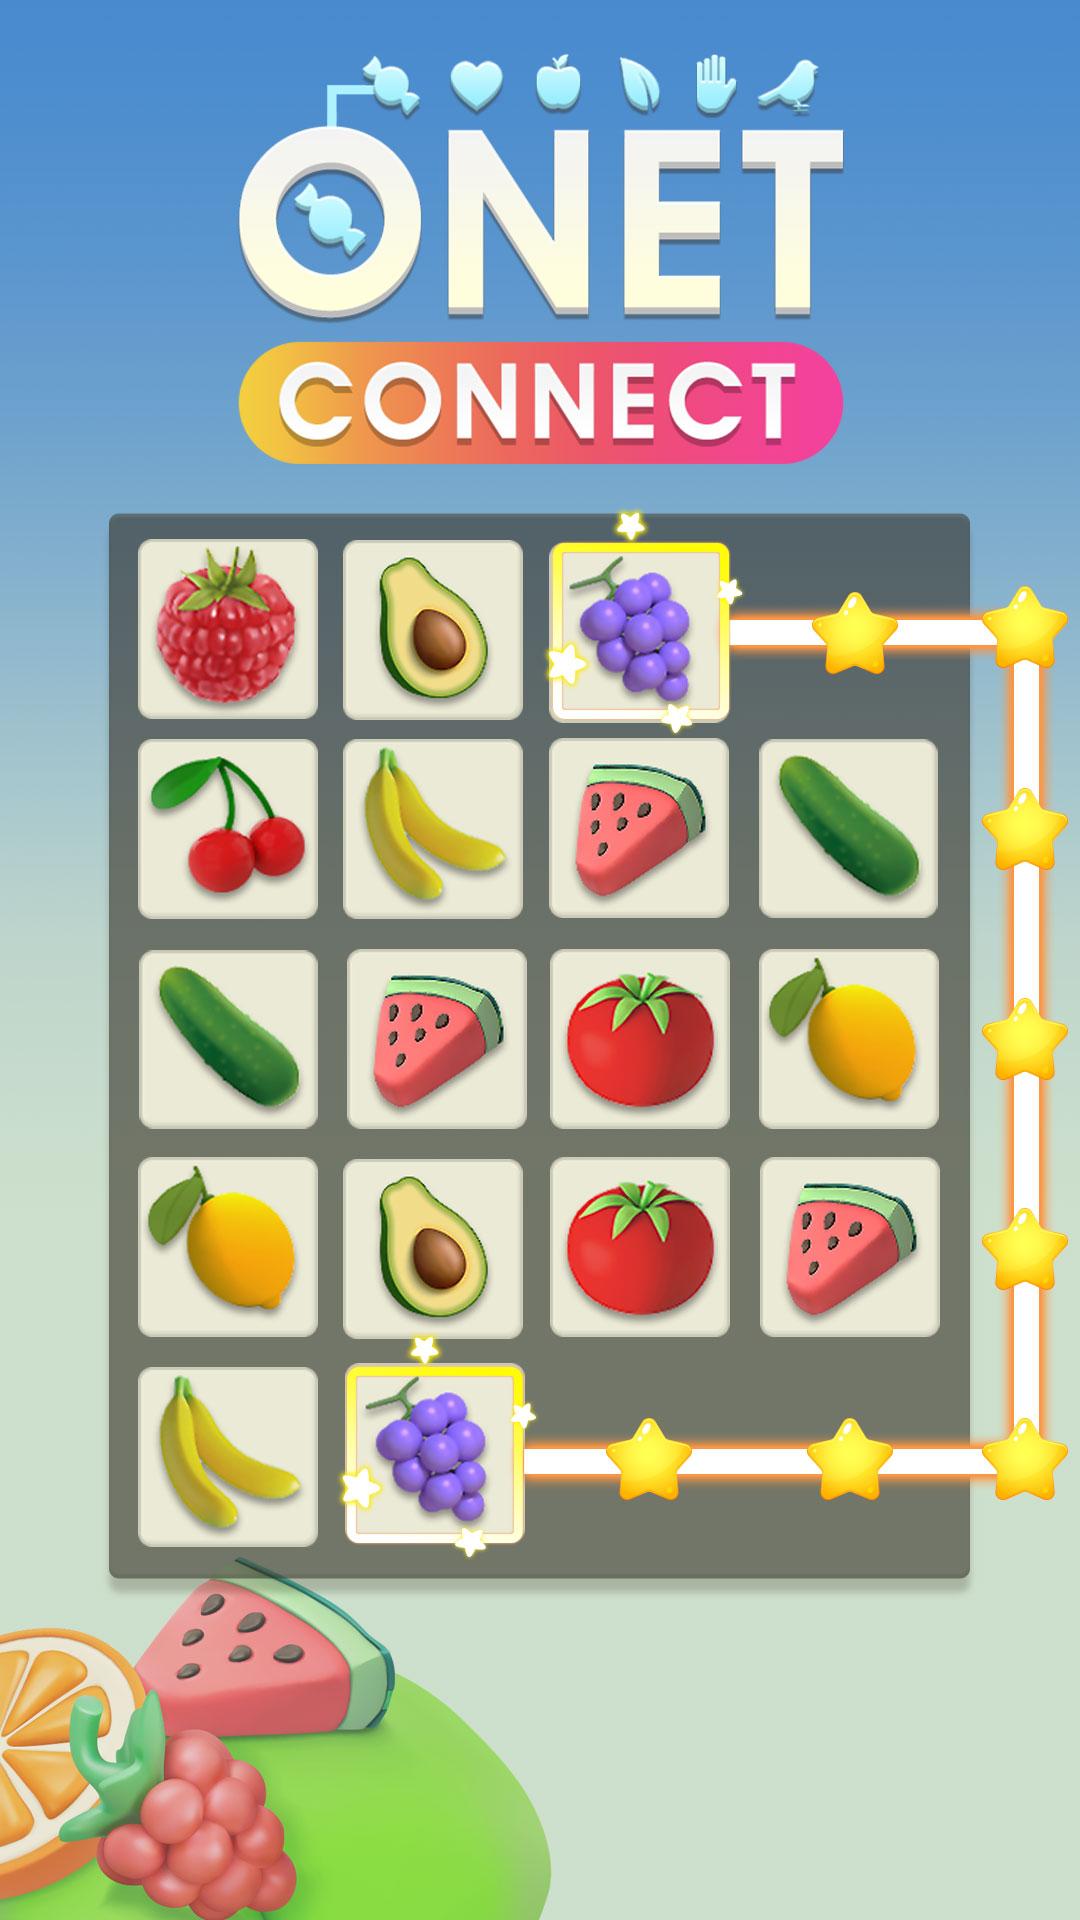 Onet Connect Free Tile Match Puzzle Game 1.1.0 Screenshot 17